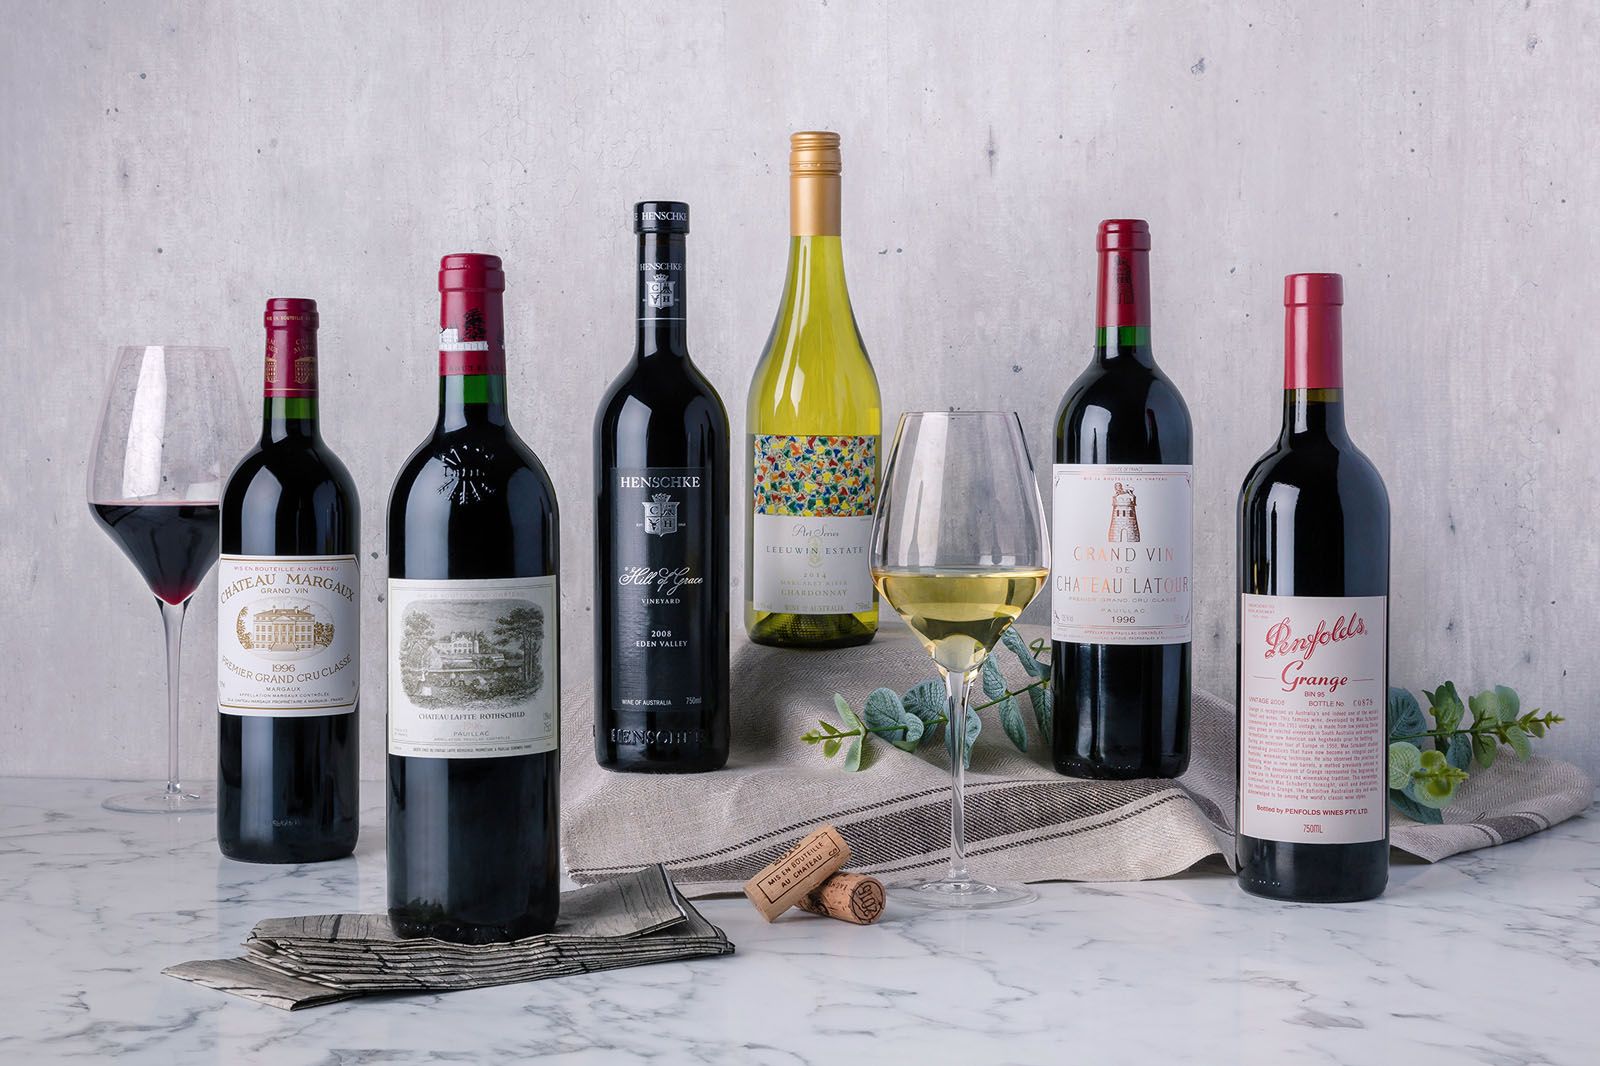 Here Are The Winners Of The Wine Pinnacle Awards Presented By Genting Singapore 2019 photo